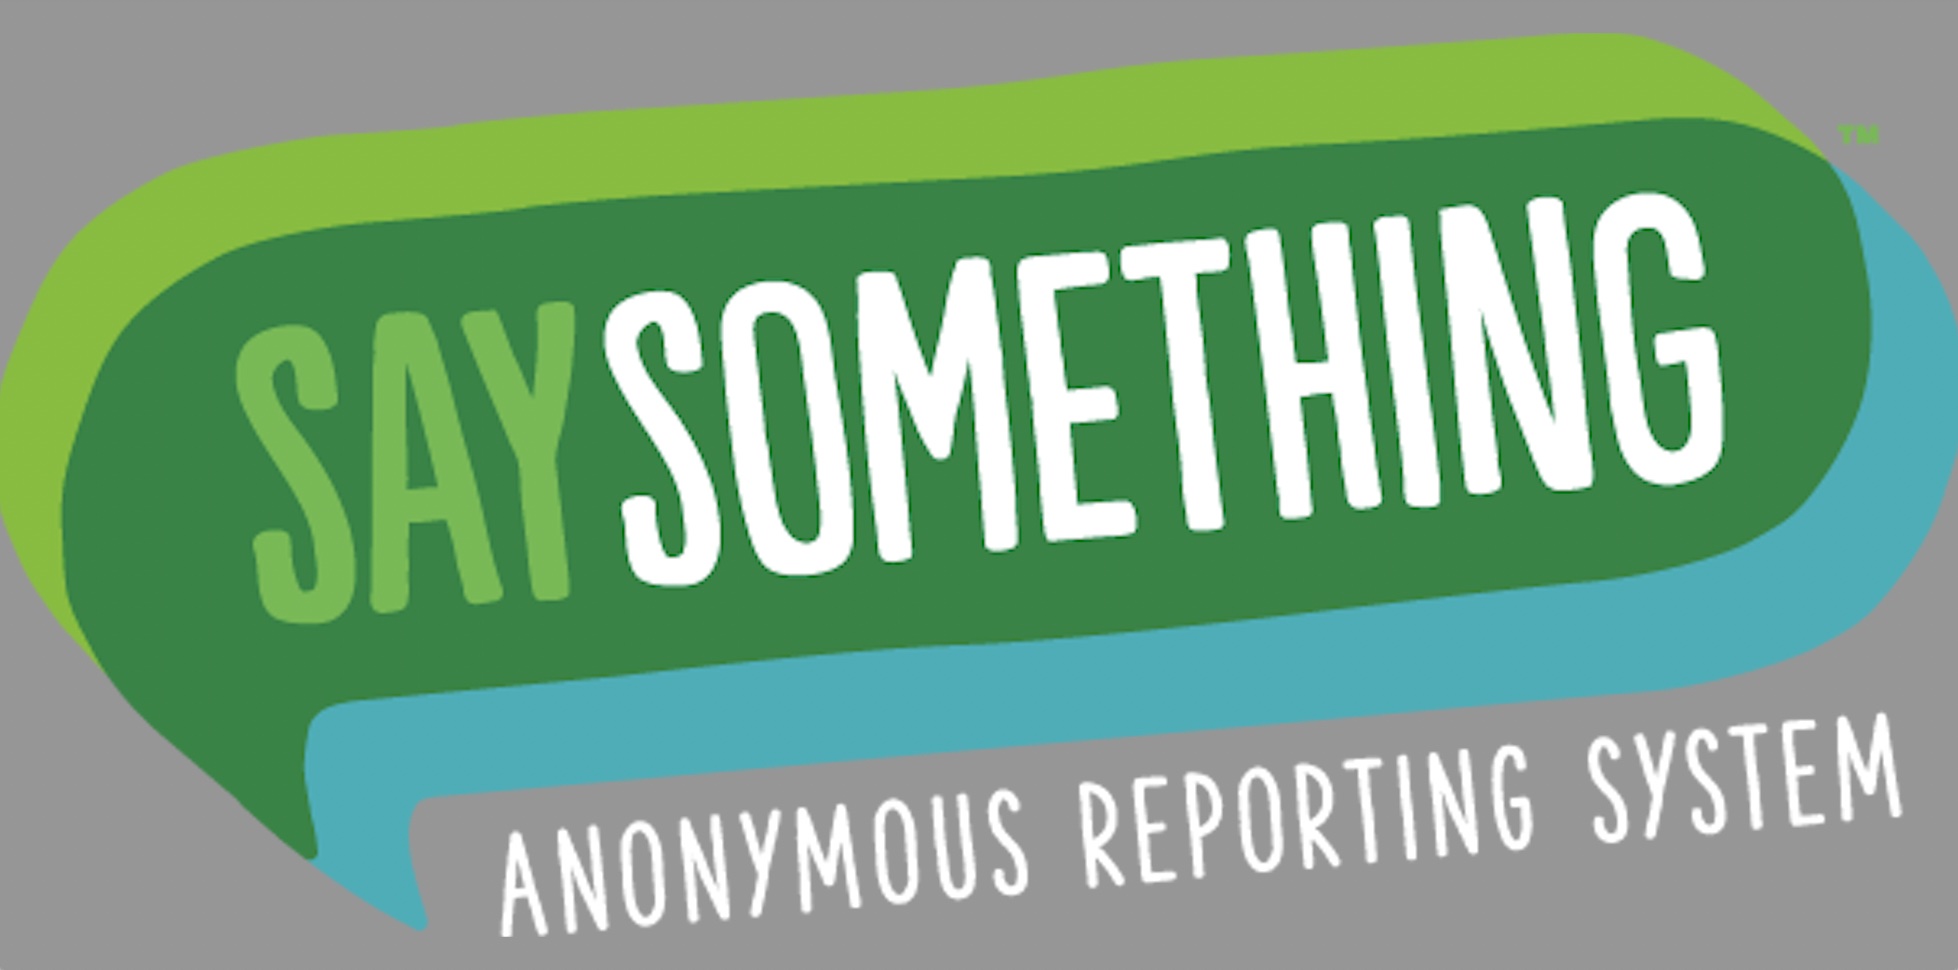 Say Something Anonymous Reporting System